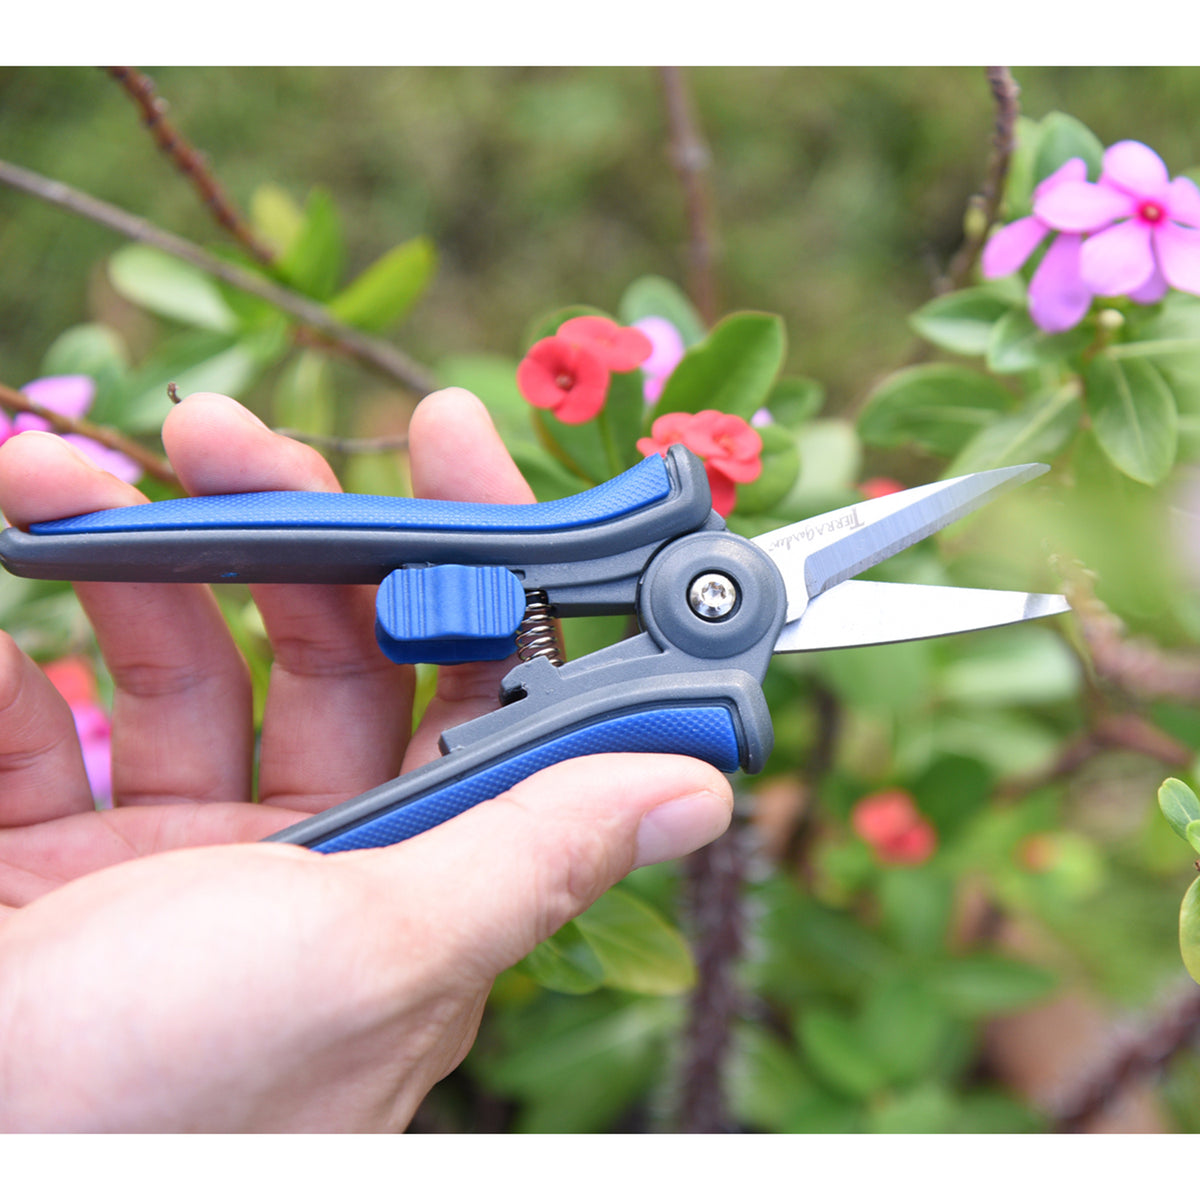 Stainless Steel Floral Pruner with TPR Handle